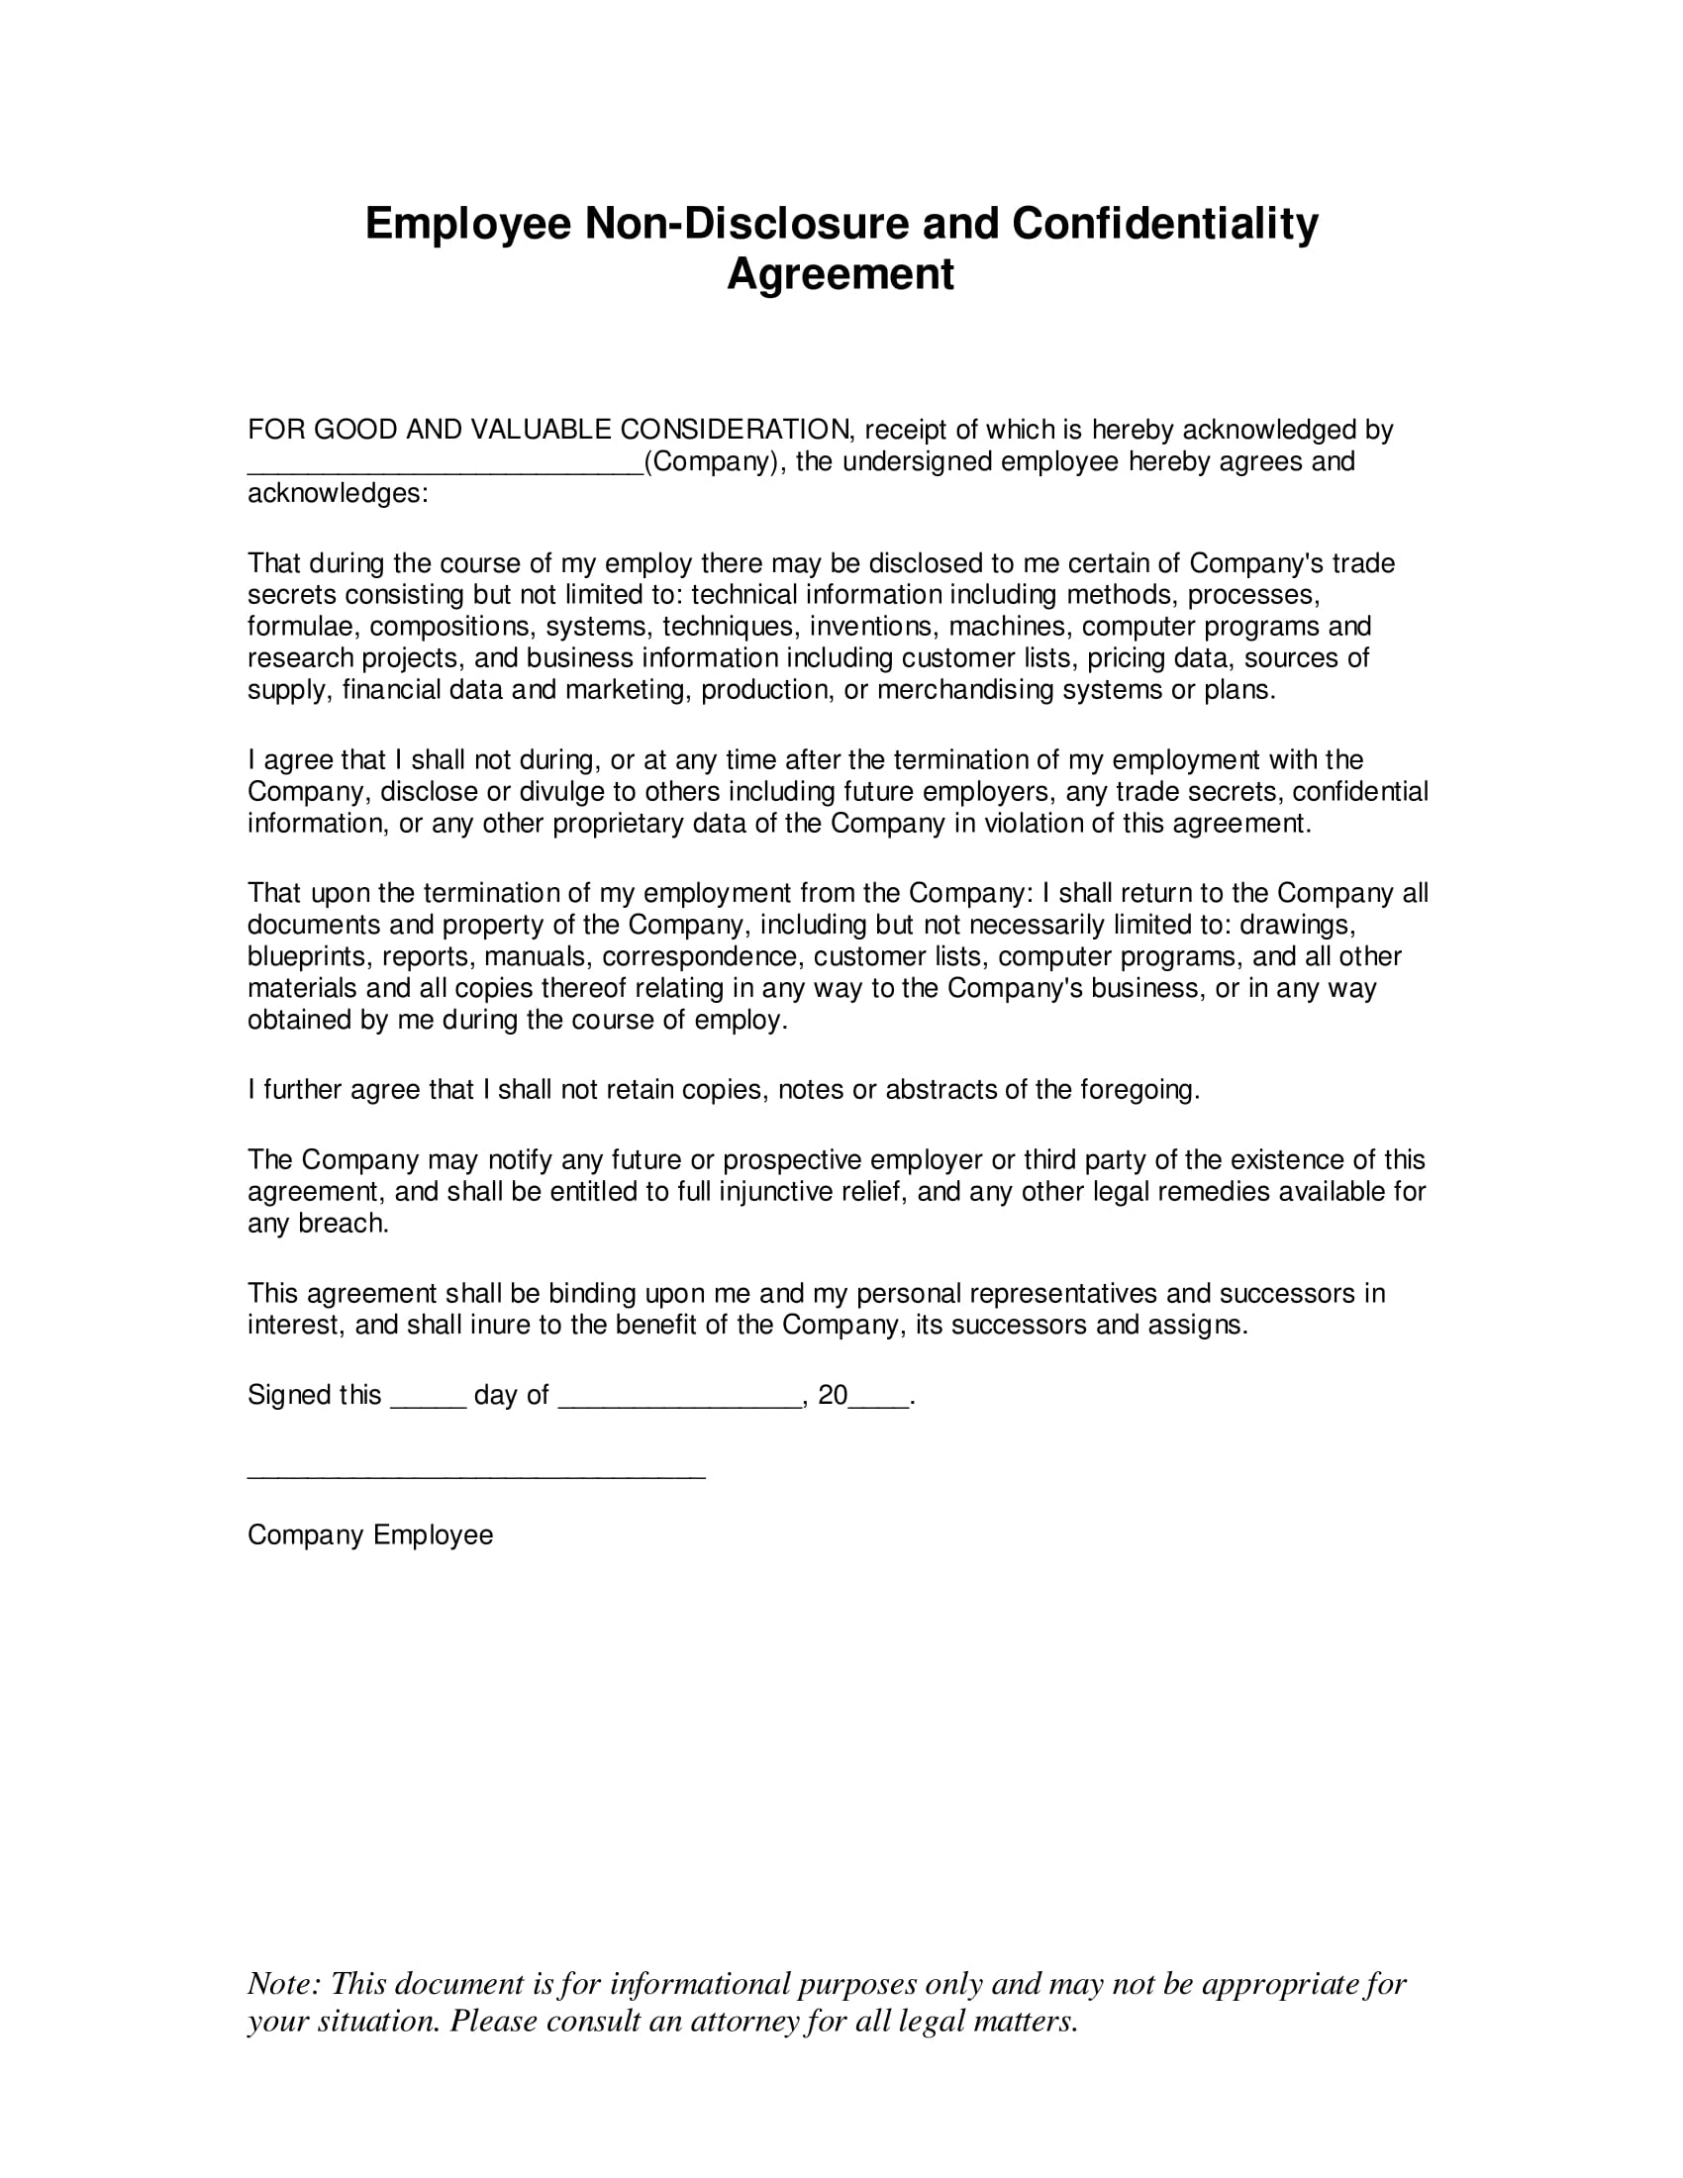 Employee Confidentiality Agreement - 11+ Examples, Format, Pdf | Examples With Regard To Standard Confidentiality Agreement Template